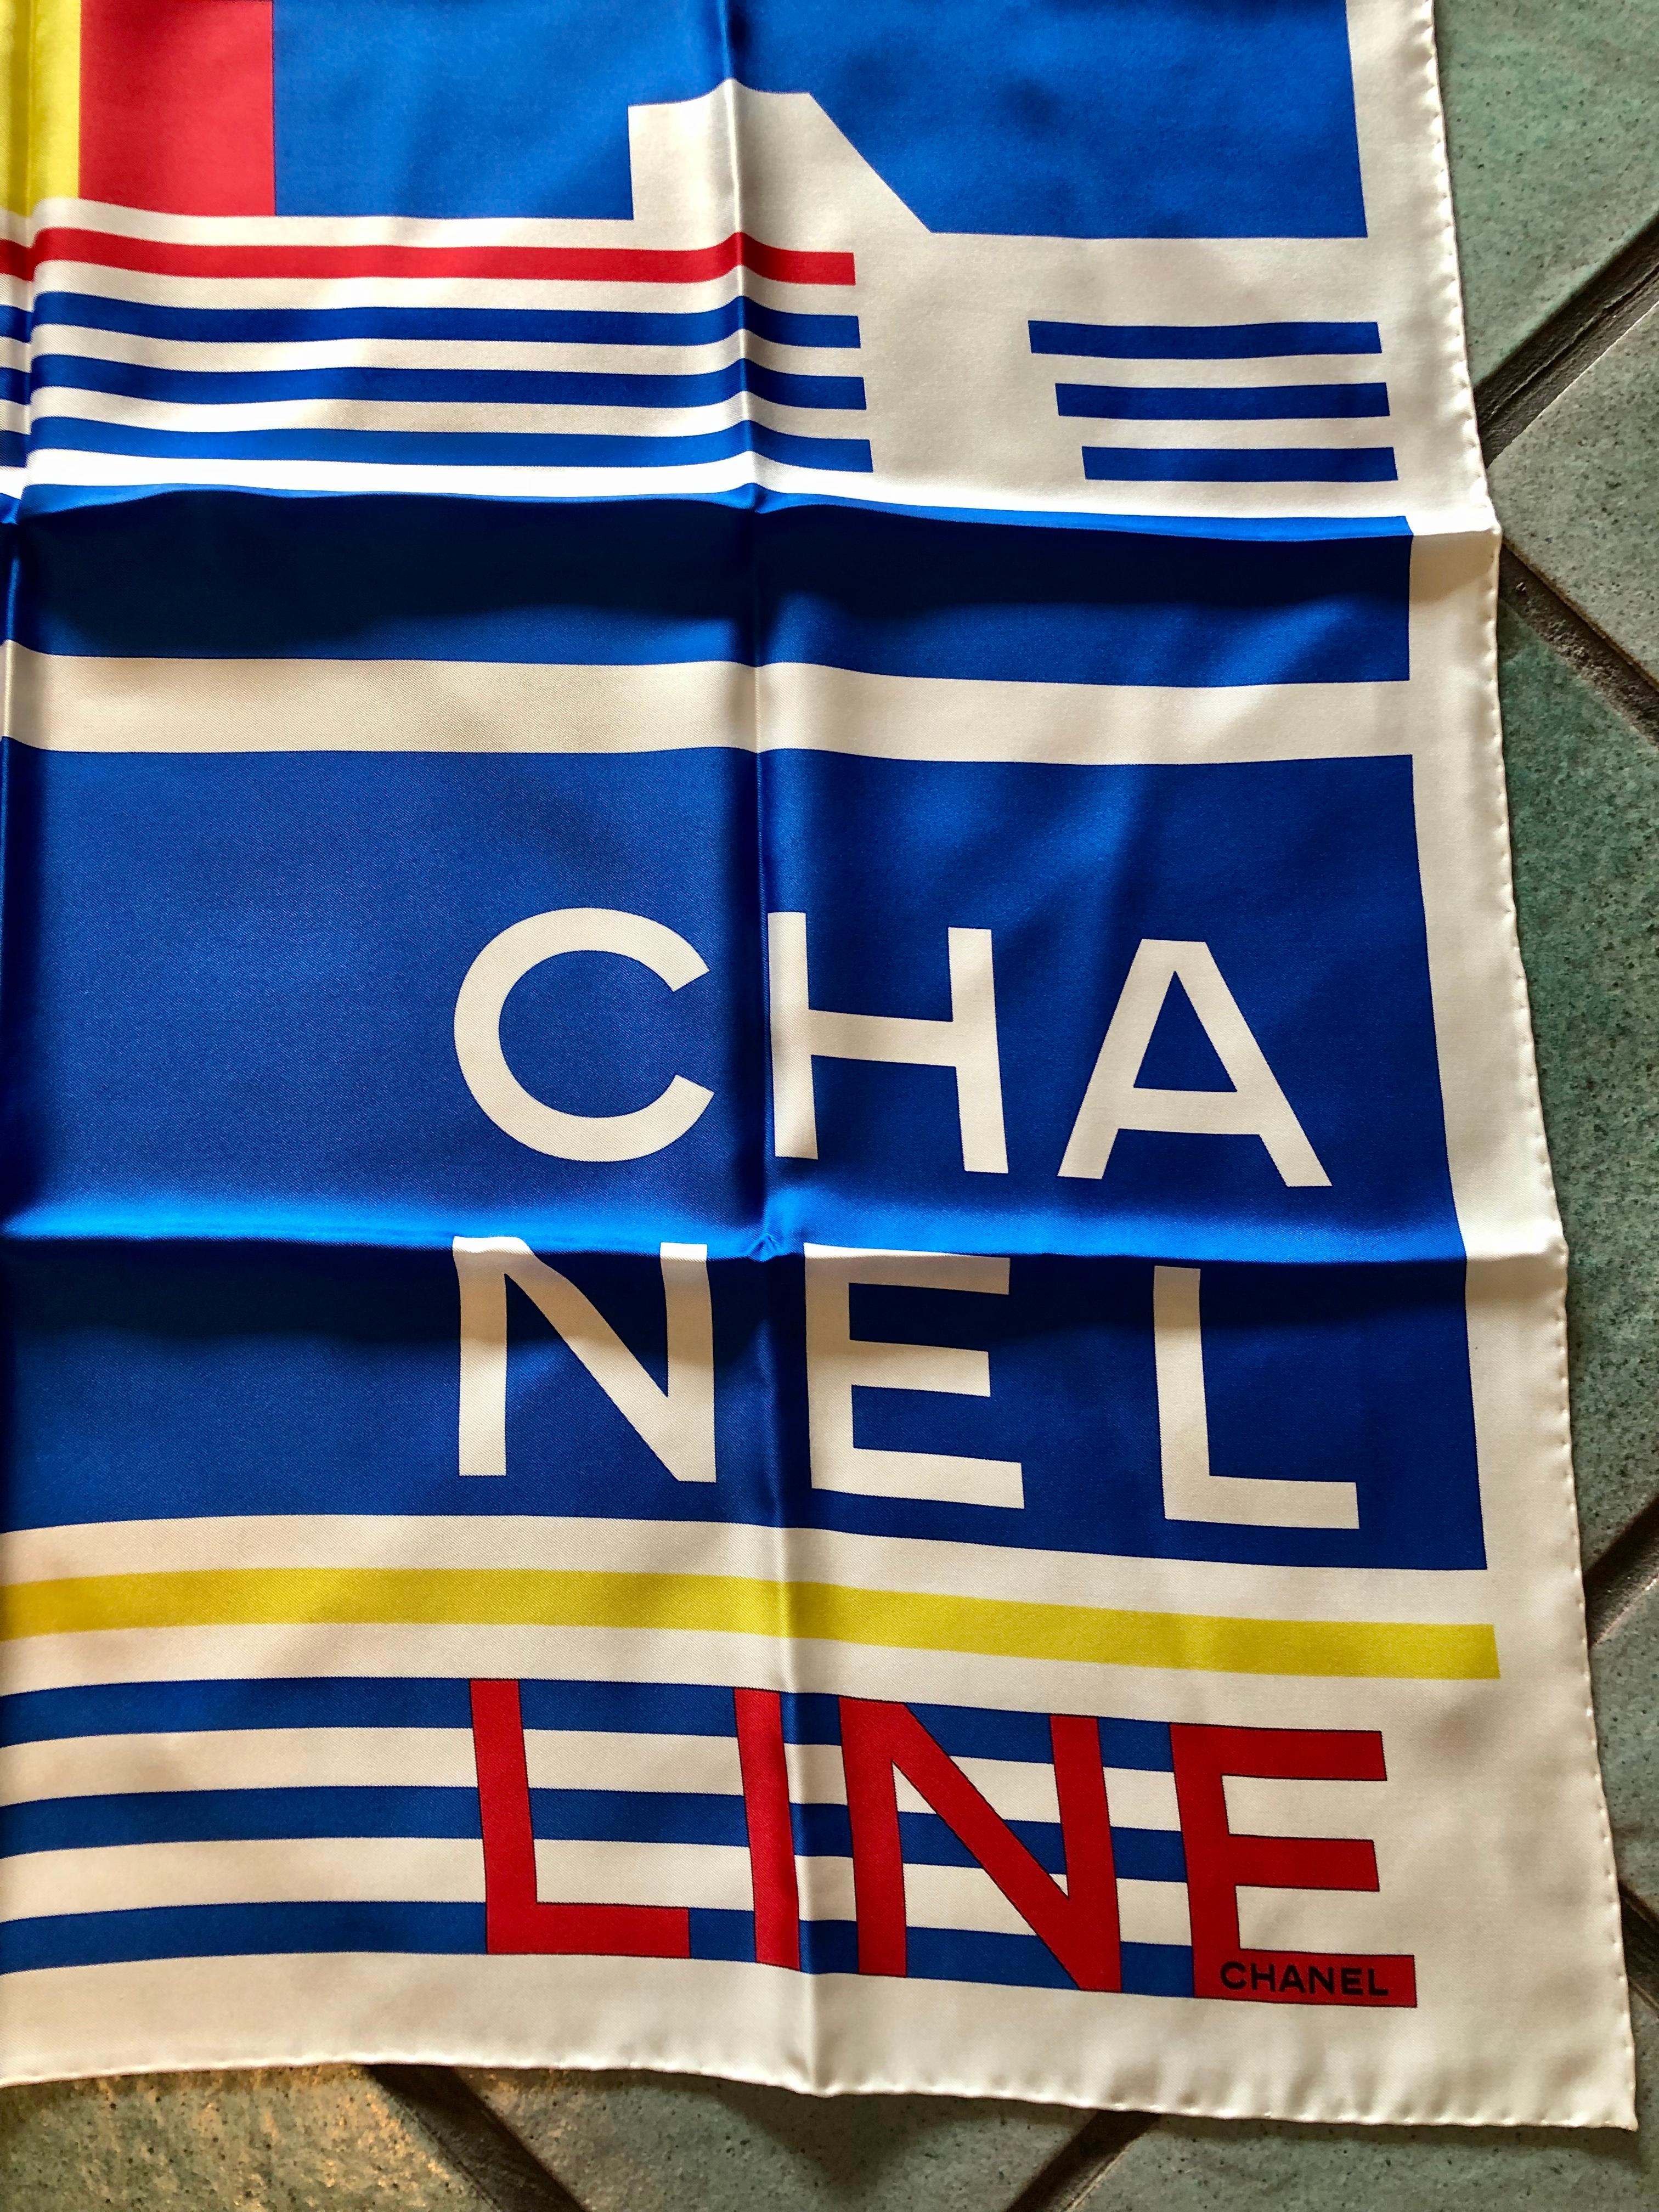 Chanel silk carrè. Print Cruise 2019. New without tag and box, never worn.
Measure: 90 x 90 cm approximately.